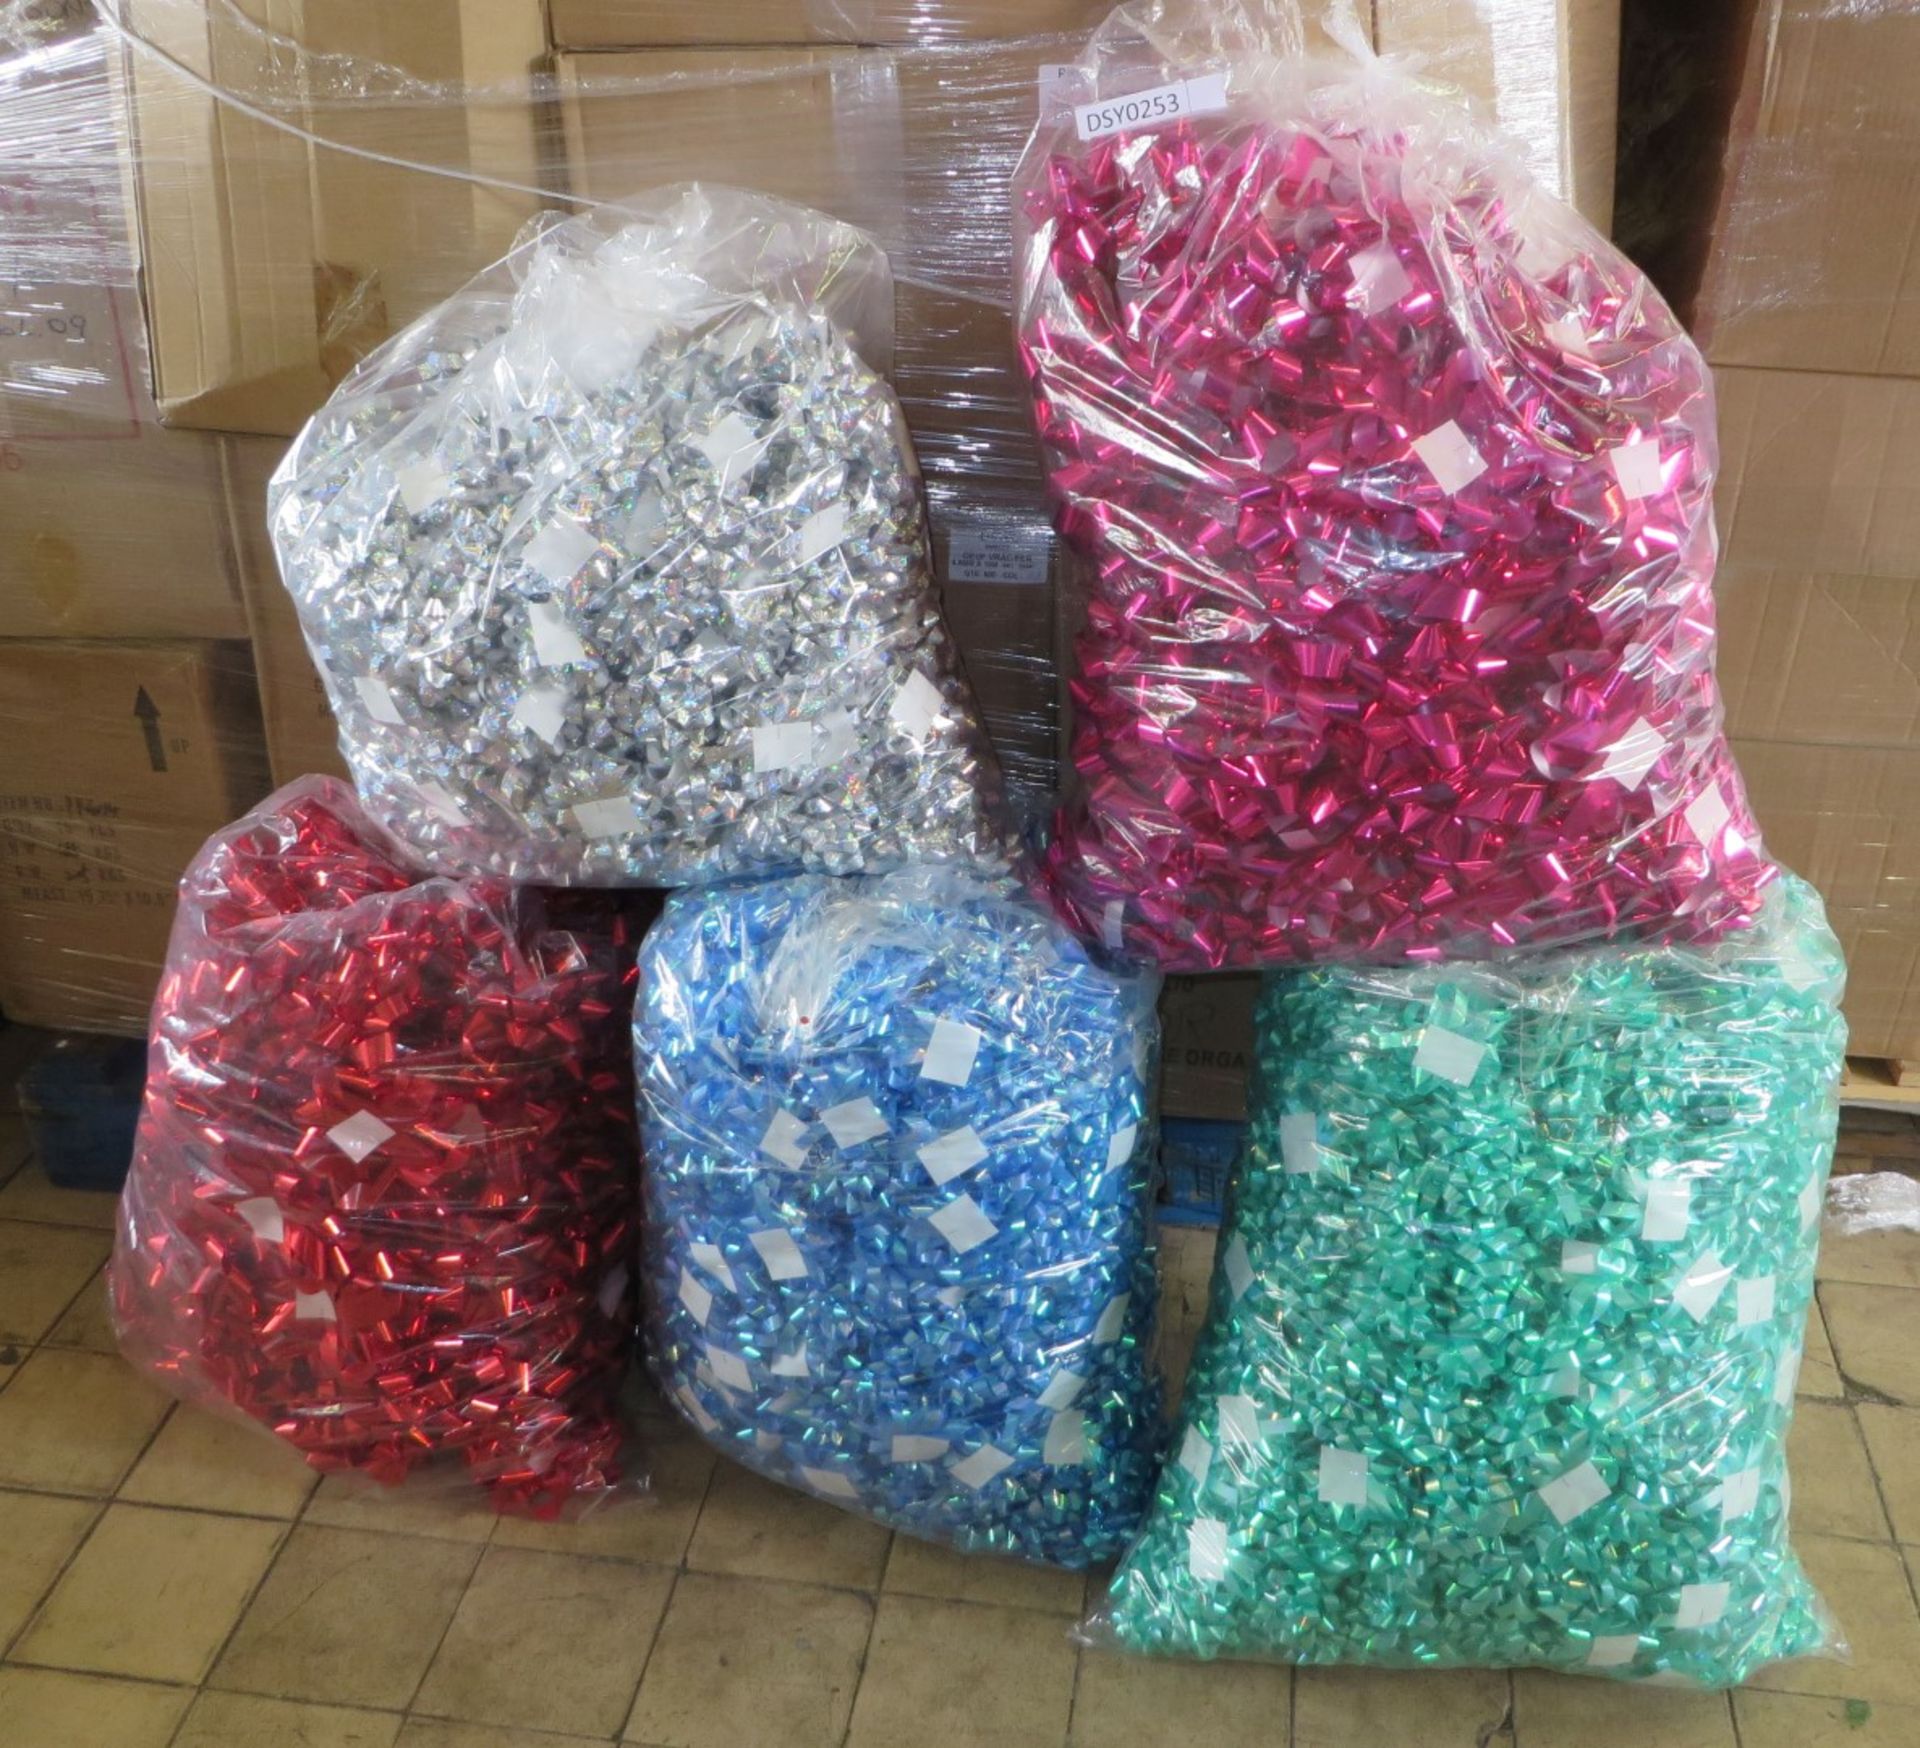 5 x Large Bags of New Self-Adhesive Present Bows - CL185 - Ref: DSY0253 - Location: Stoke-on-Trent S